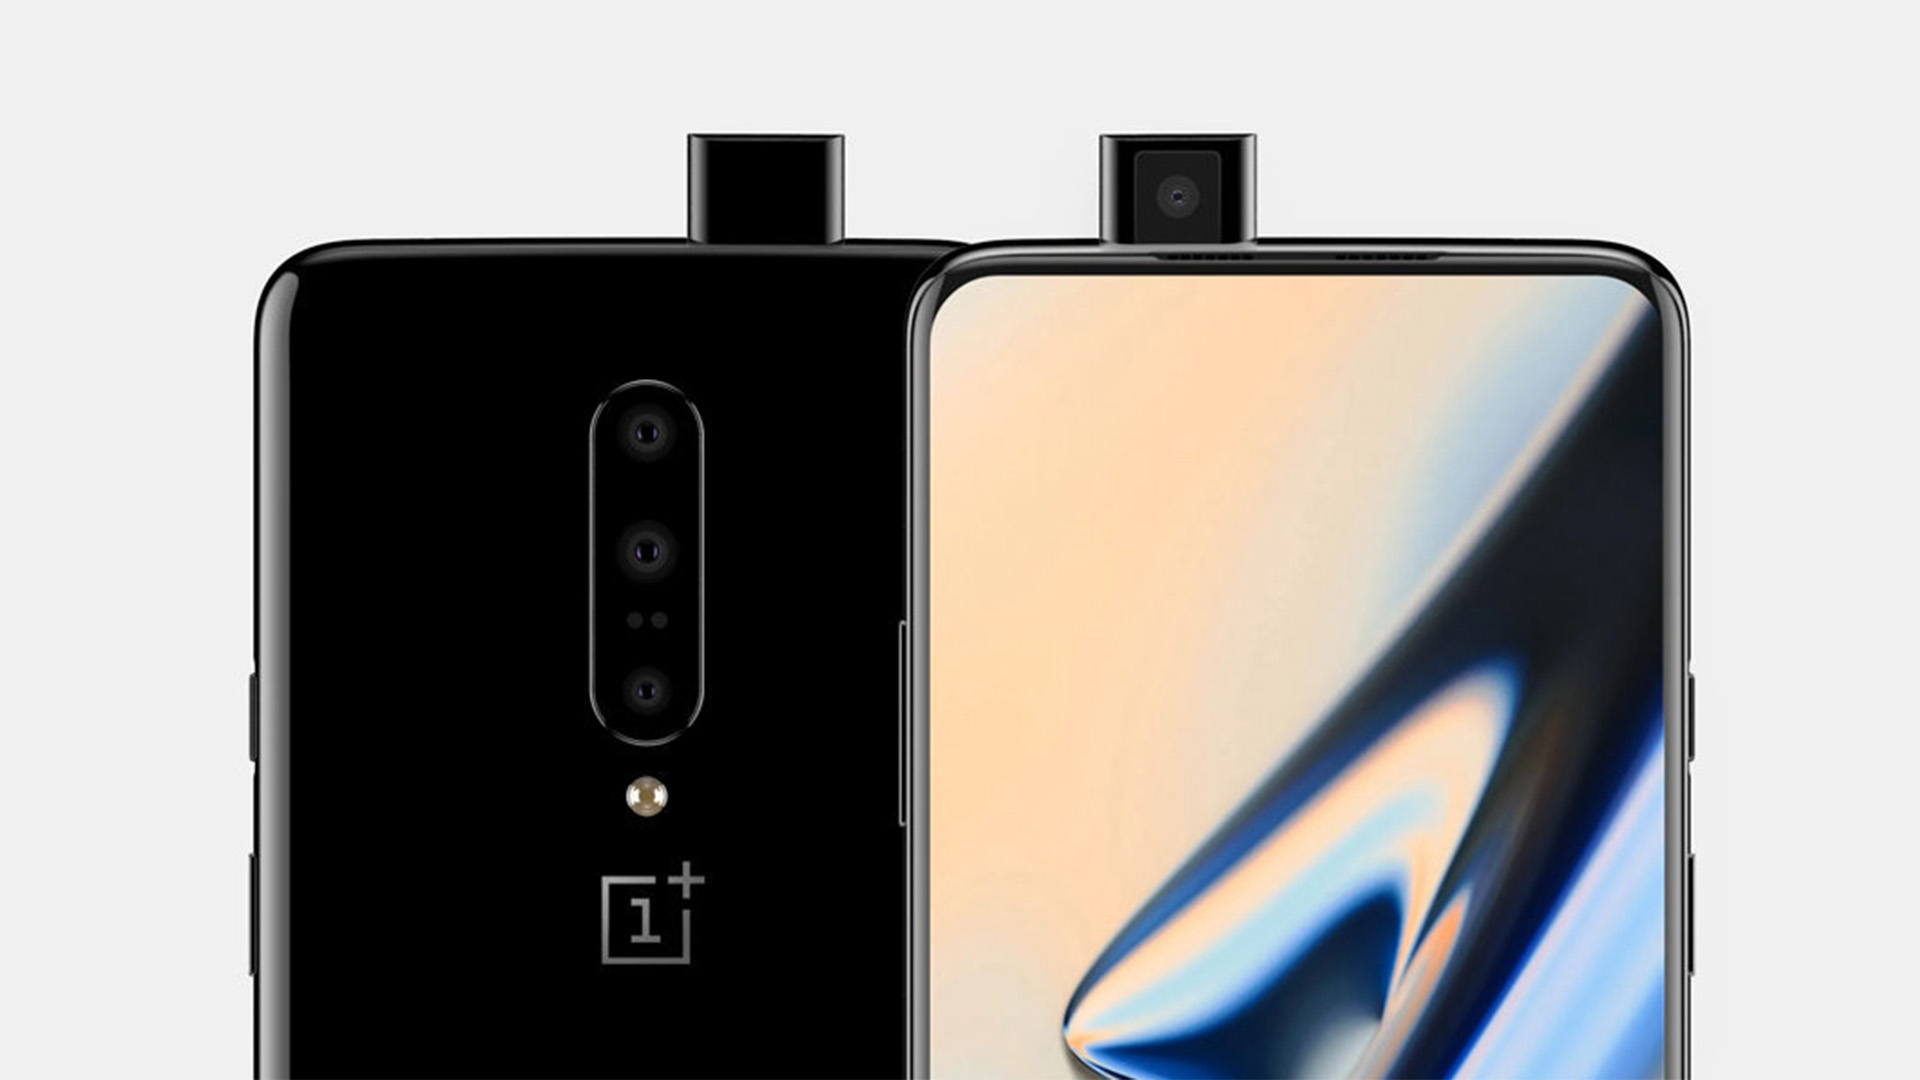 OnePlus 7 Pro users have started noticing random phantom taps on their screens﻿